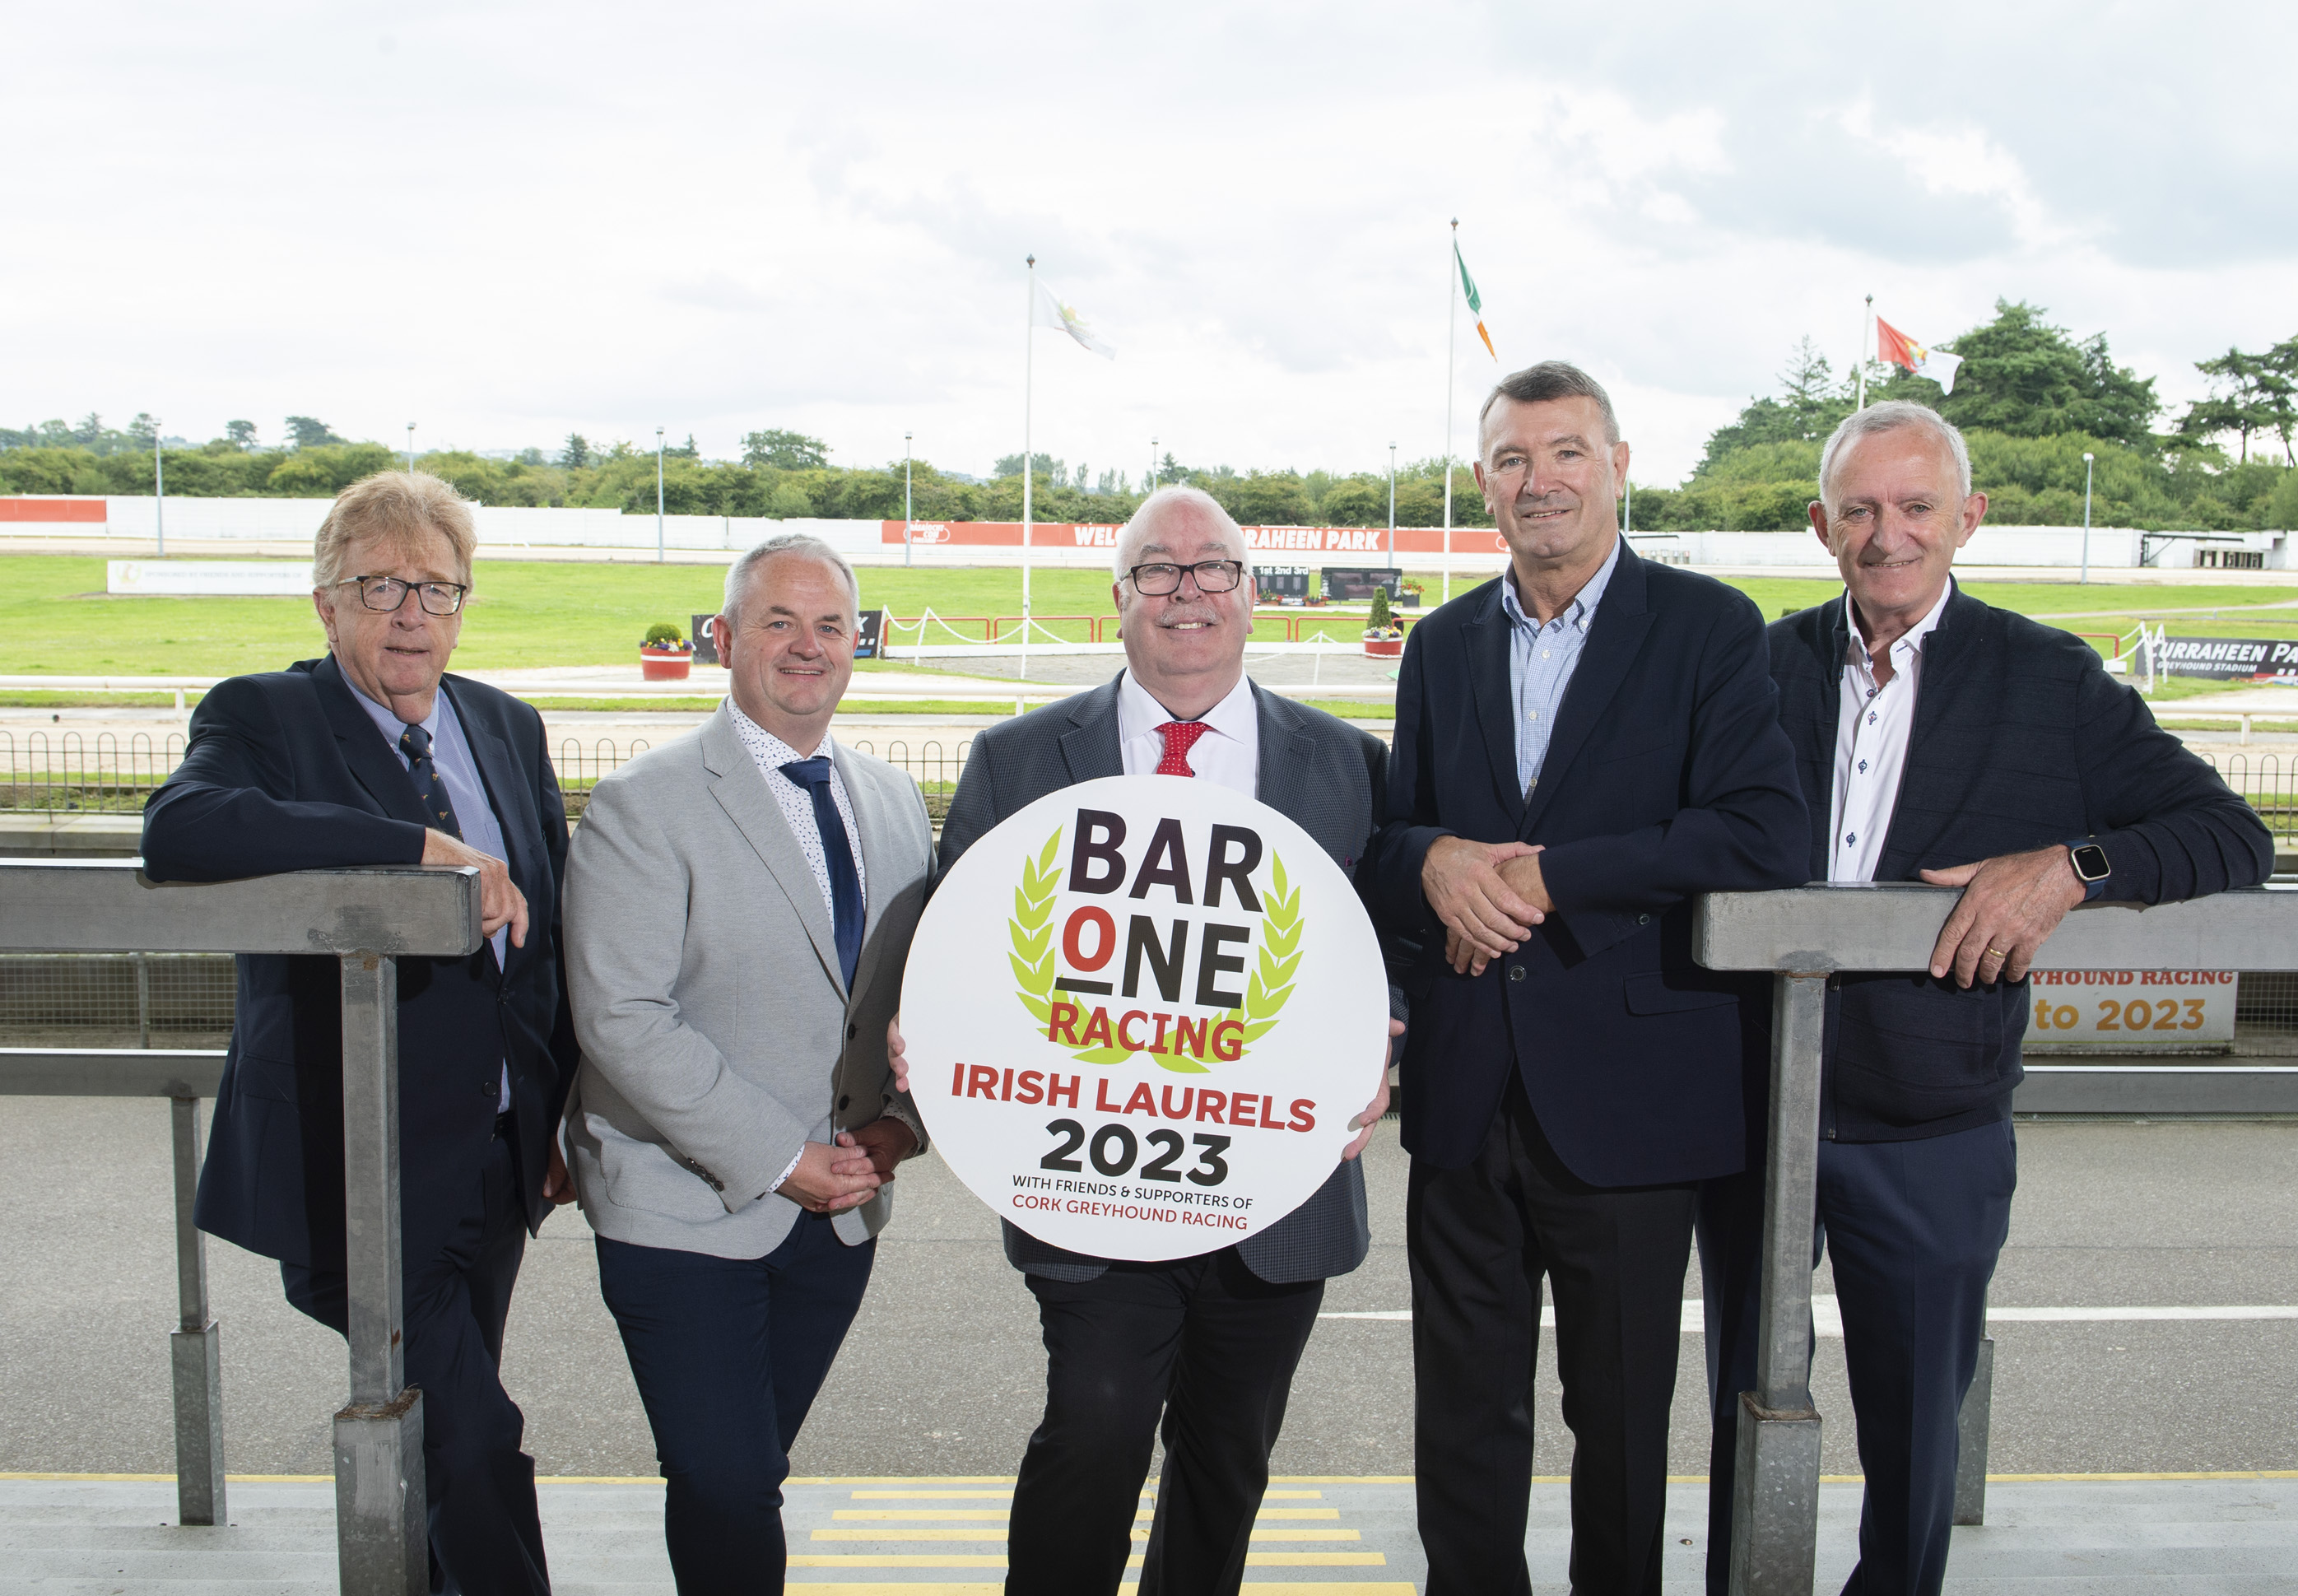 Frank Nyhan, (Chairman GRI), Alex Grassick (Board Member, GRI) Barney O'Hare (Bar One Racing), Jimmy Barry Murphy & Richie O'Regan (Board Member, GRI) at the launch of the new sponorship partnership for the Irish Greyhound Laurels